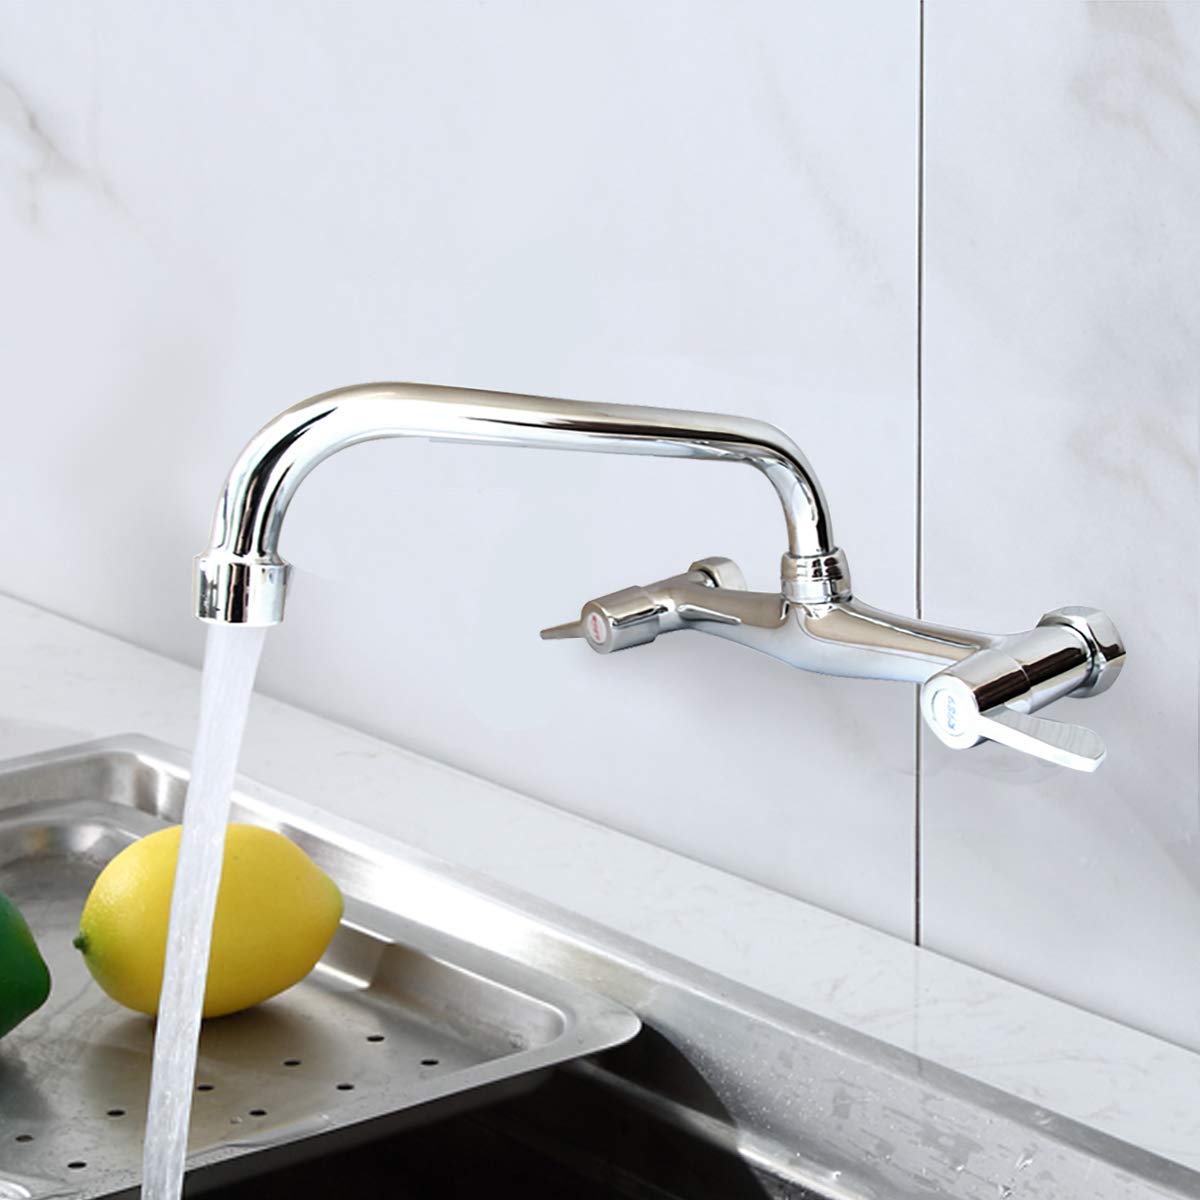 Vroweth Wall Mount Kitchen Faucet Polished Chrome Mixer Widespread Spout